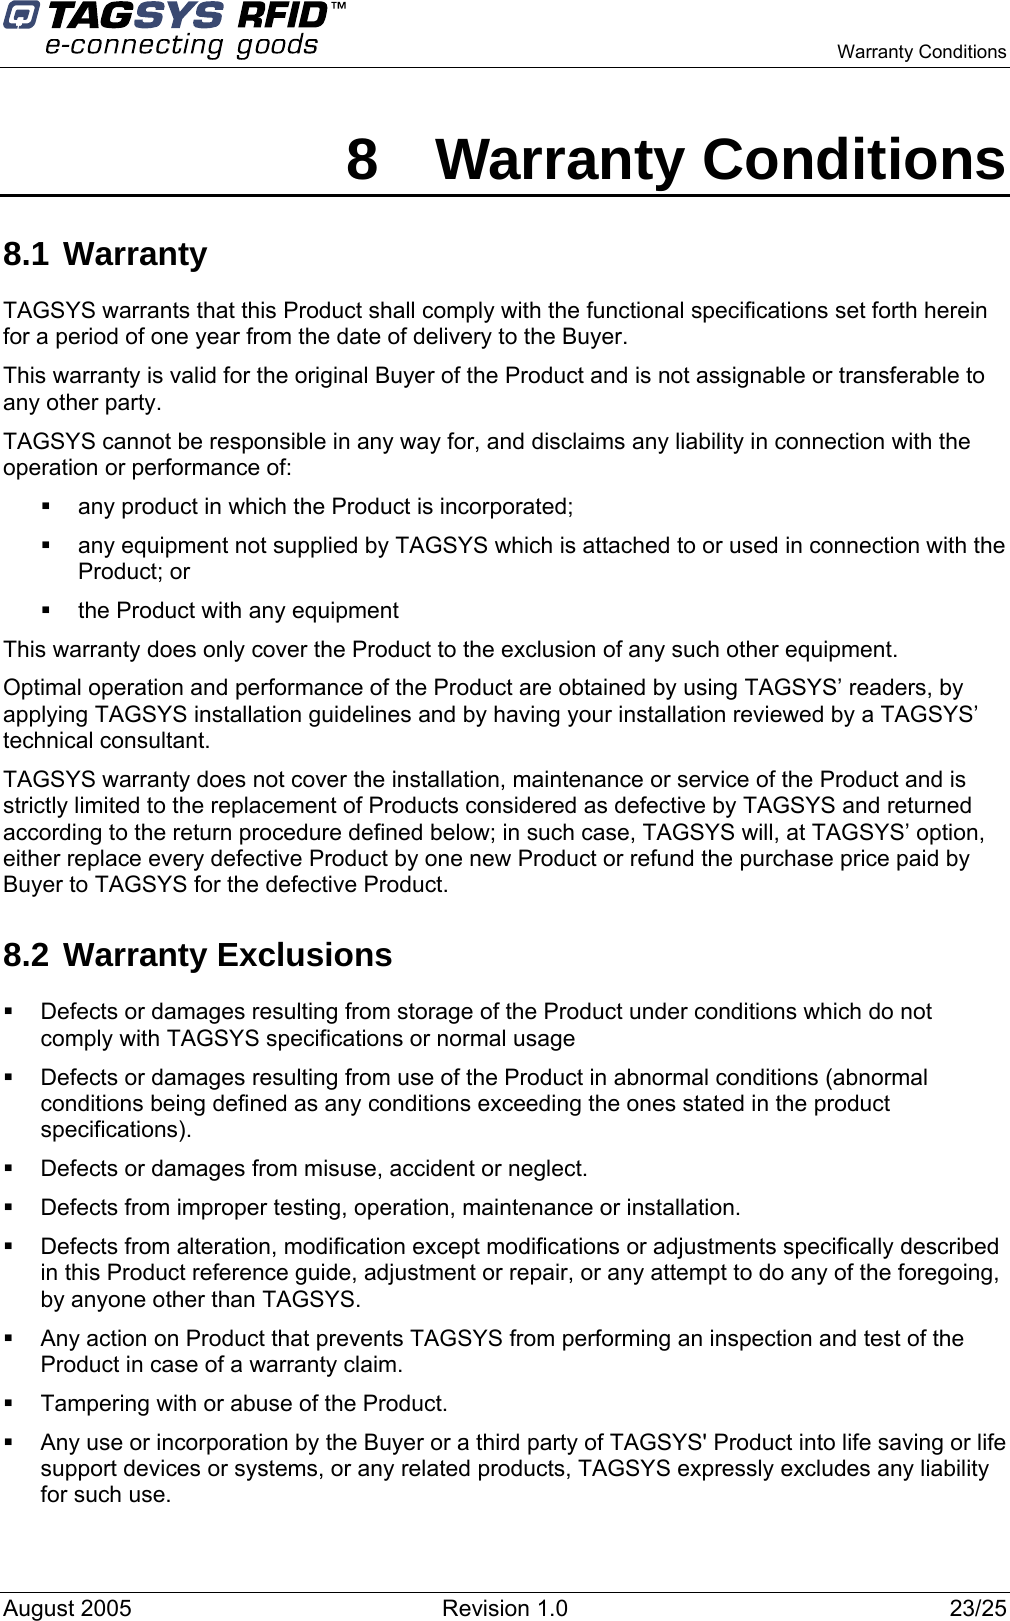    Warranty Conditions    8 Warranty Conditions 8.1 Warranty TAGSYS warrants that this Product shall comply with the functional specifications set forth herein for a period of one year from the date of delivery to the Buyer. This warranty is valid for the original Buyer of the Product and is not assignable or transferable to any other party. TAGSYS cannot be responsible in any way for, and disclaims any liability in connection with the operation or performance of:   any product in which the Product is incorporated;   any equipment not supplied by TAGSYS which is attached to or used in connection with the Product; or   the Product with any equipment This warranty does only cover the Product to the exclusion of any such other equipment. Optimal operation and performance of the Product are obtained by using TAGSYS’ readers, by applying TAGSYS installation guidelines and by having your installation reviewed by a TAGSYS’ technical consultant. TAGSYS warranty does not cover the installation, maintenance or service of the Product and is strictly limited to the replacement of Products considered as defective by TAGSYS and returned according to the return procedure defined below; in such case, TAGSYS will, at TAGSYS’ option, either replace every defective Product by one new Product or refund the purchase price paid by Buyer to TAGSYS for the defective Product. 8.2 Warranty Exclusions   Defects or damages resulting from storage of the Product under conditions which do not comply with TAGSYS specifications or normal usage   Defects or damages resulting from use of the Product in abnormal conditions (abnormal conditions being defined as any conditions exceeding the ones stated in the product specifications).   Defects or damages from misuse, accident or neglect.   Defects from improper testing, operation, maintenance or installation.   Defects from alteration, modification except modifications or adjustments specifically described in this Product reference guide, adjustment or repair, or any attempt to do any of the foregoing, by anyone other than TAGSYS.   Any action on Product that prevents TAGSYS from performing an inspection and test of the Product in case of a warranty claim.   Tampering with or abuse of the Product.   Any use or incorporation by the Buyer or a third party of TAGSYS&apos; Product into life saving or life support devices or systems, or any related products, TAGSYS expressly excludes any liability for such use. August 2005  Revision 1.0  23/25   